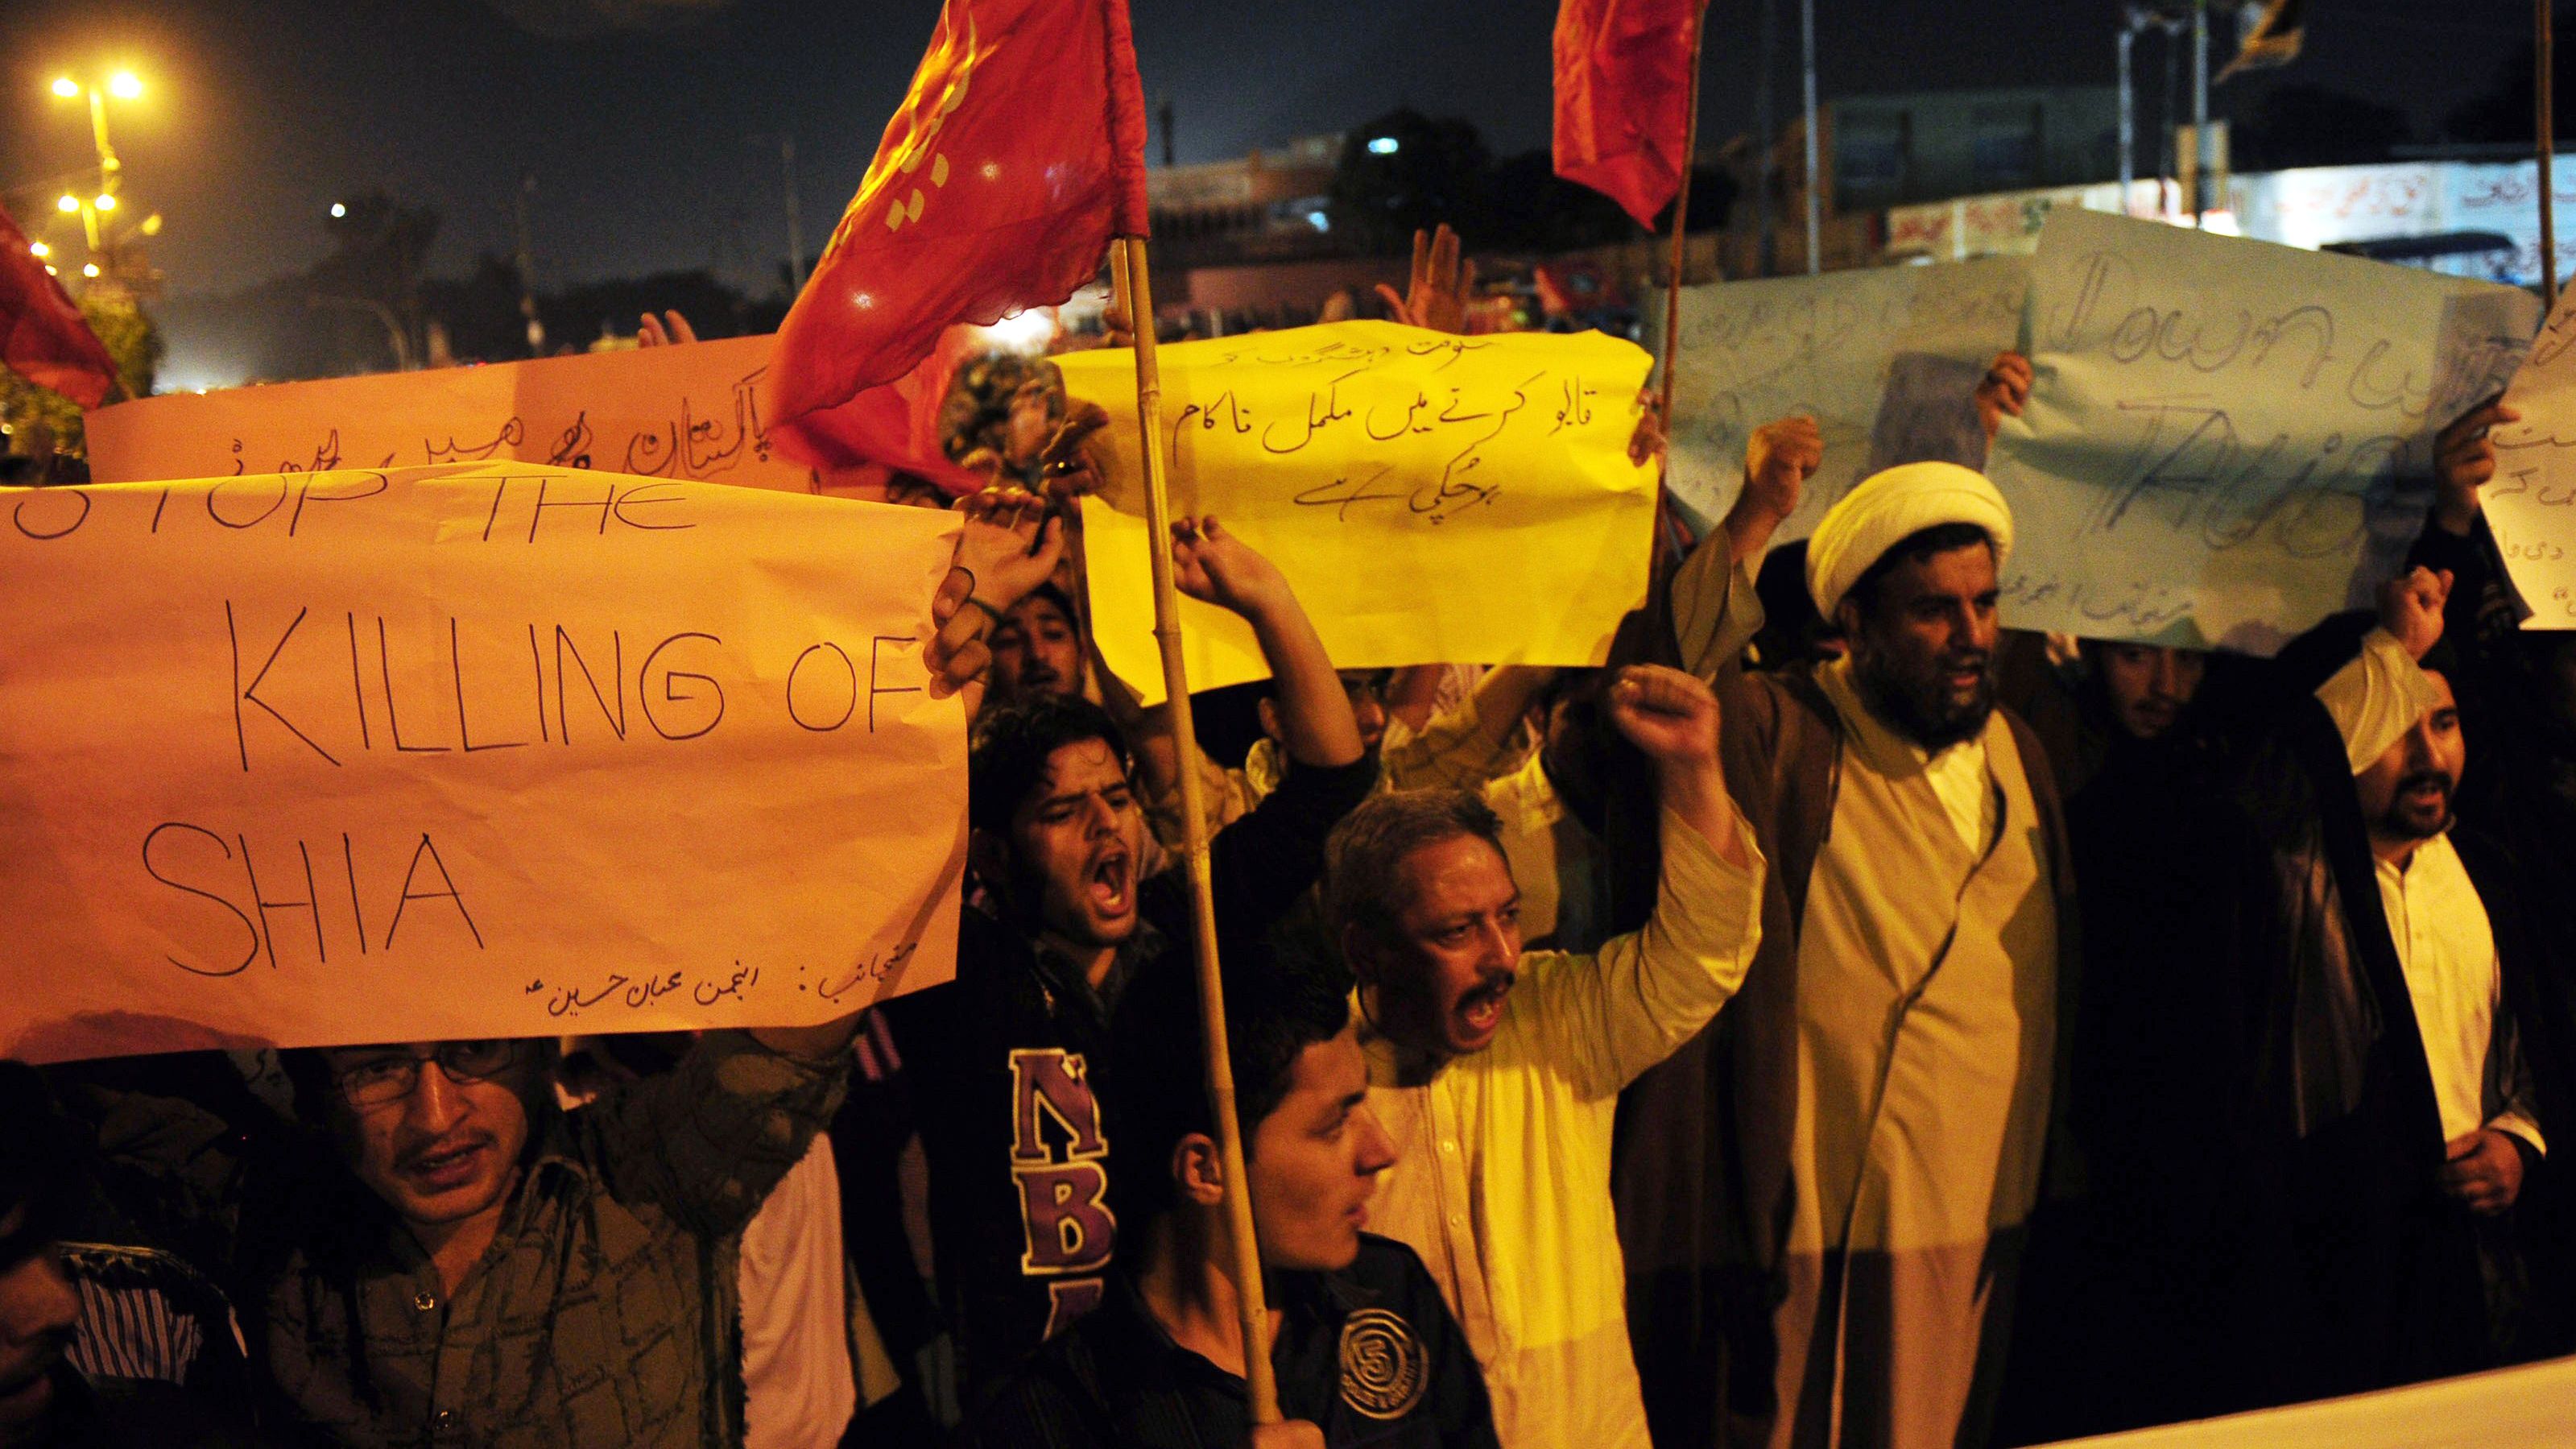 Pakistani Shiite Muslims protest against the killing of their community members in Karachi on February 28, 2012. 